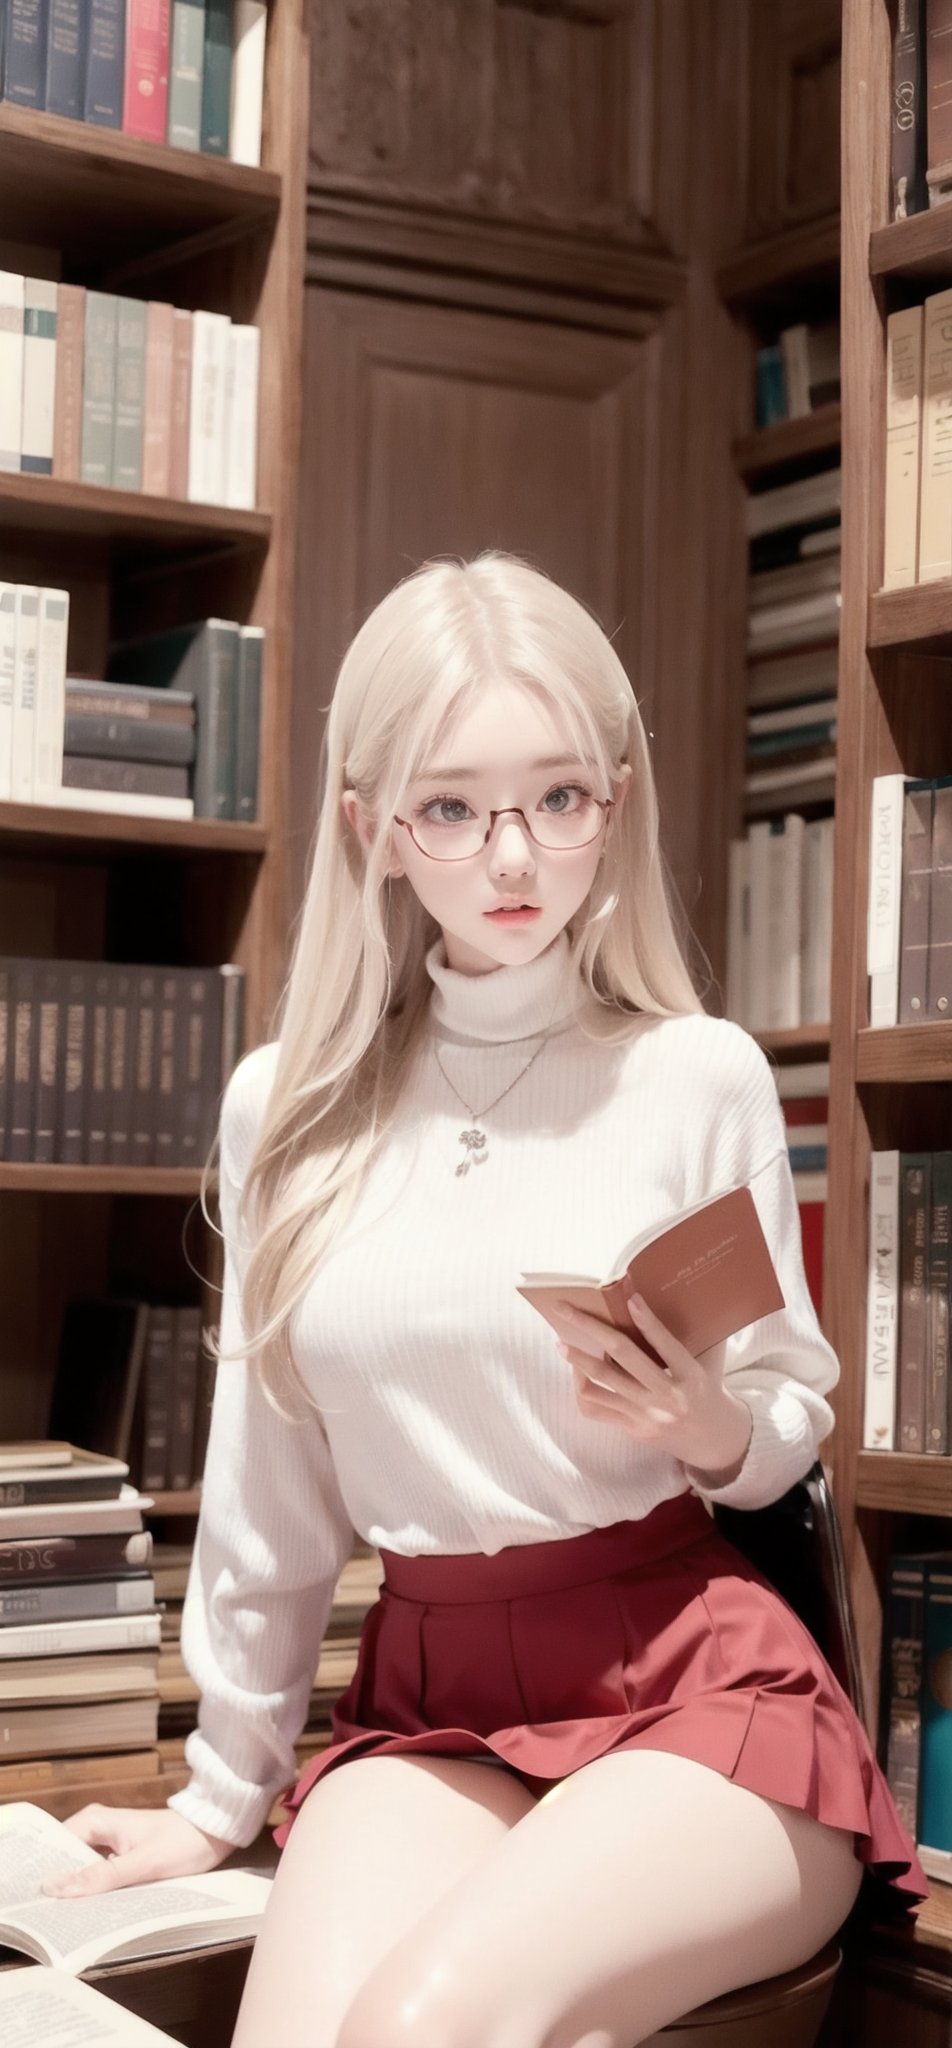 (score_9, score_8_up), score_7_up, head to hips view, tiny, slender, librarian sitting, reading a book in the dark corner of the library, eye_glasses, extra long blonde wavy hair, luxurious and voluminous, (dark red micro skirt:1.1), (white panties:1.1), pov,